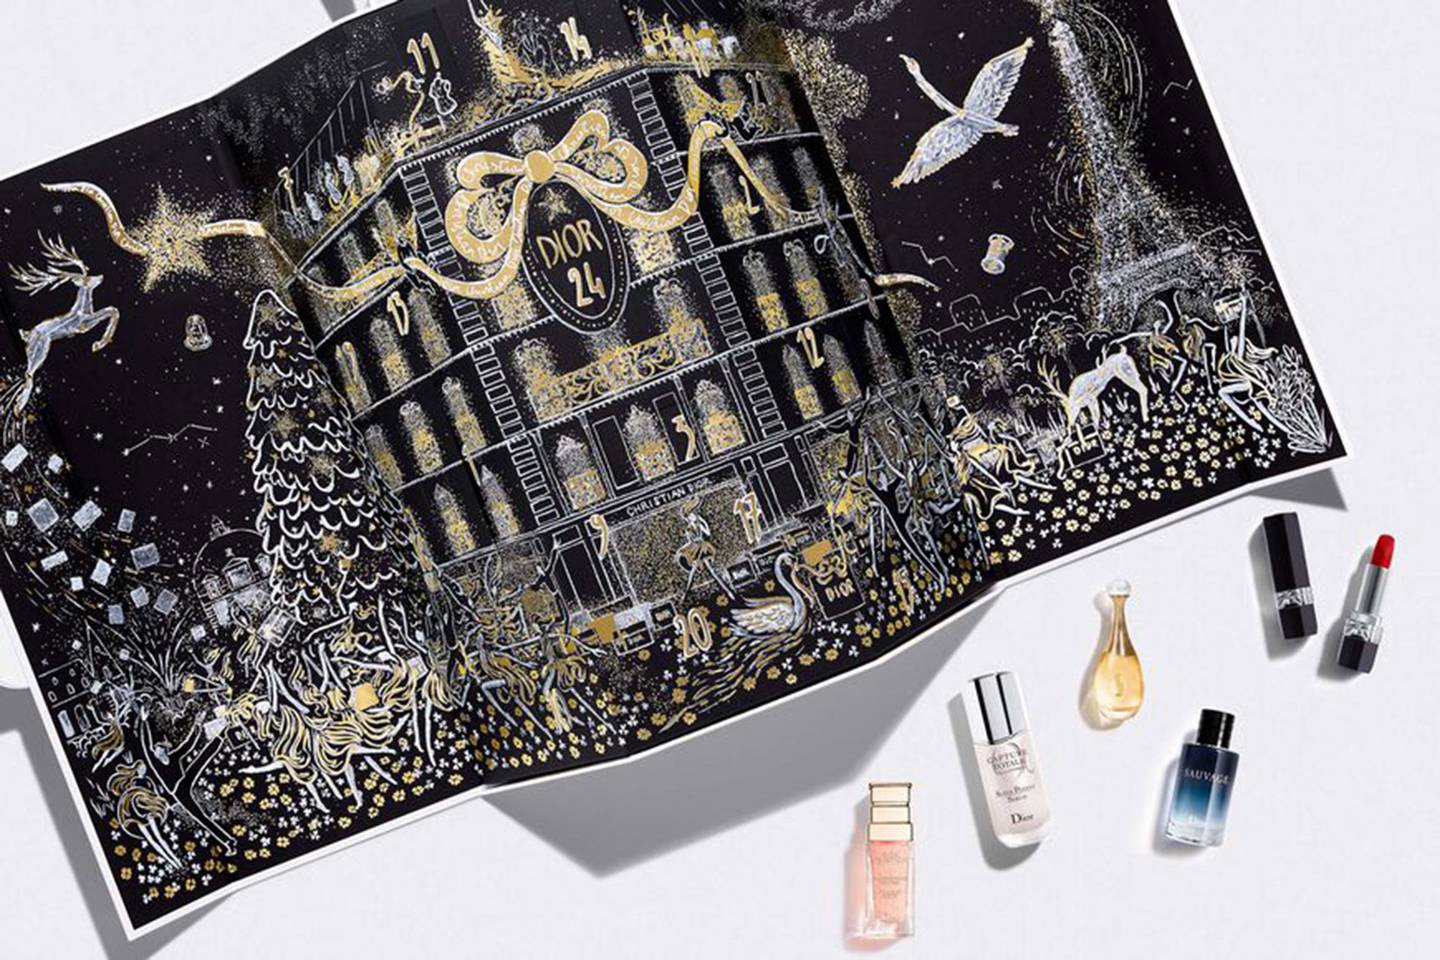 21-best-luxury-advent-calendars-for-2020-jewellery-beauty-grooming-glamour-uk